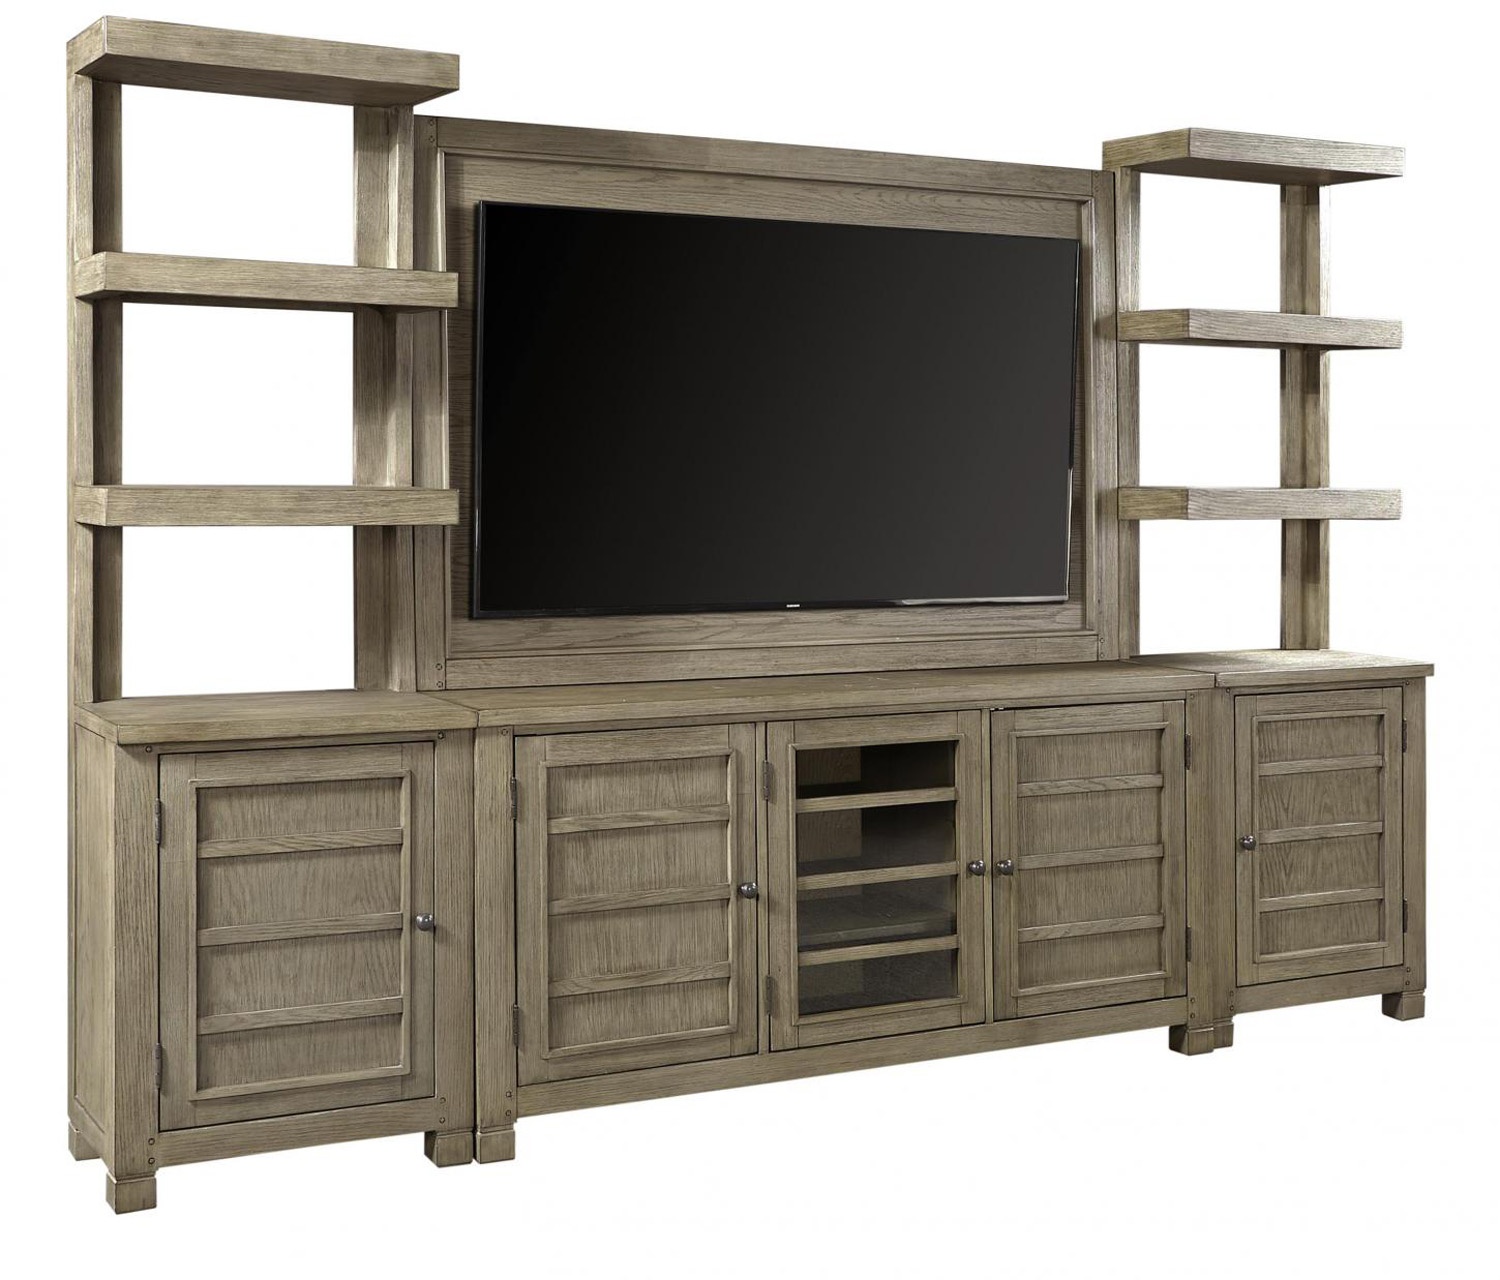 Tucker Entertainment Wall in the Stone finish